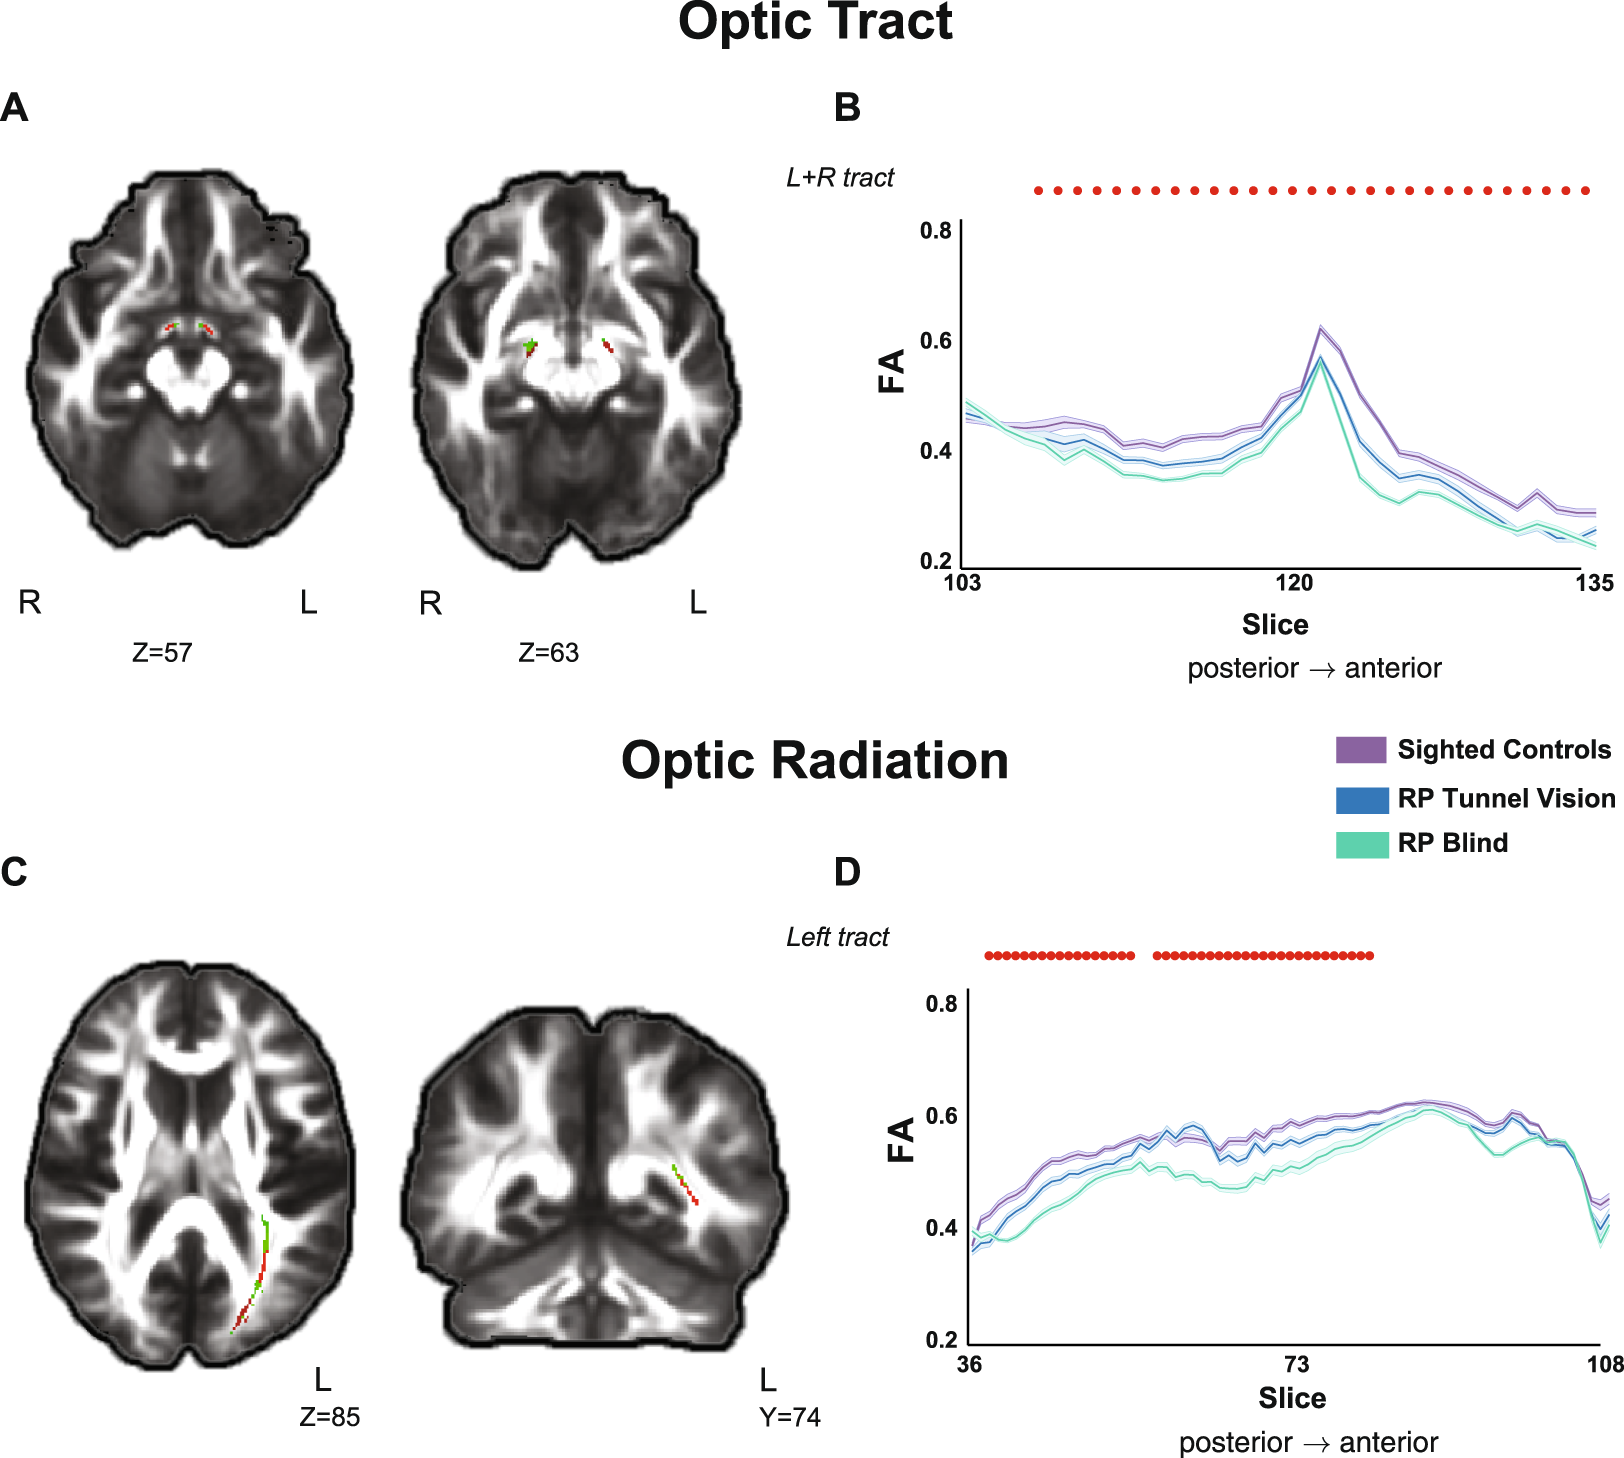 Reorganizations of latency structures within the white matter from